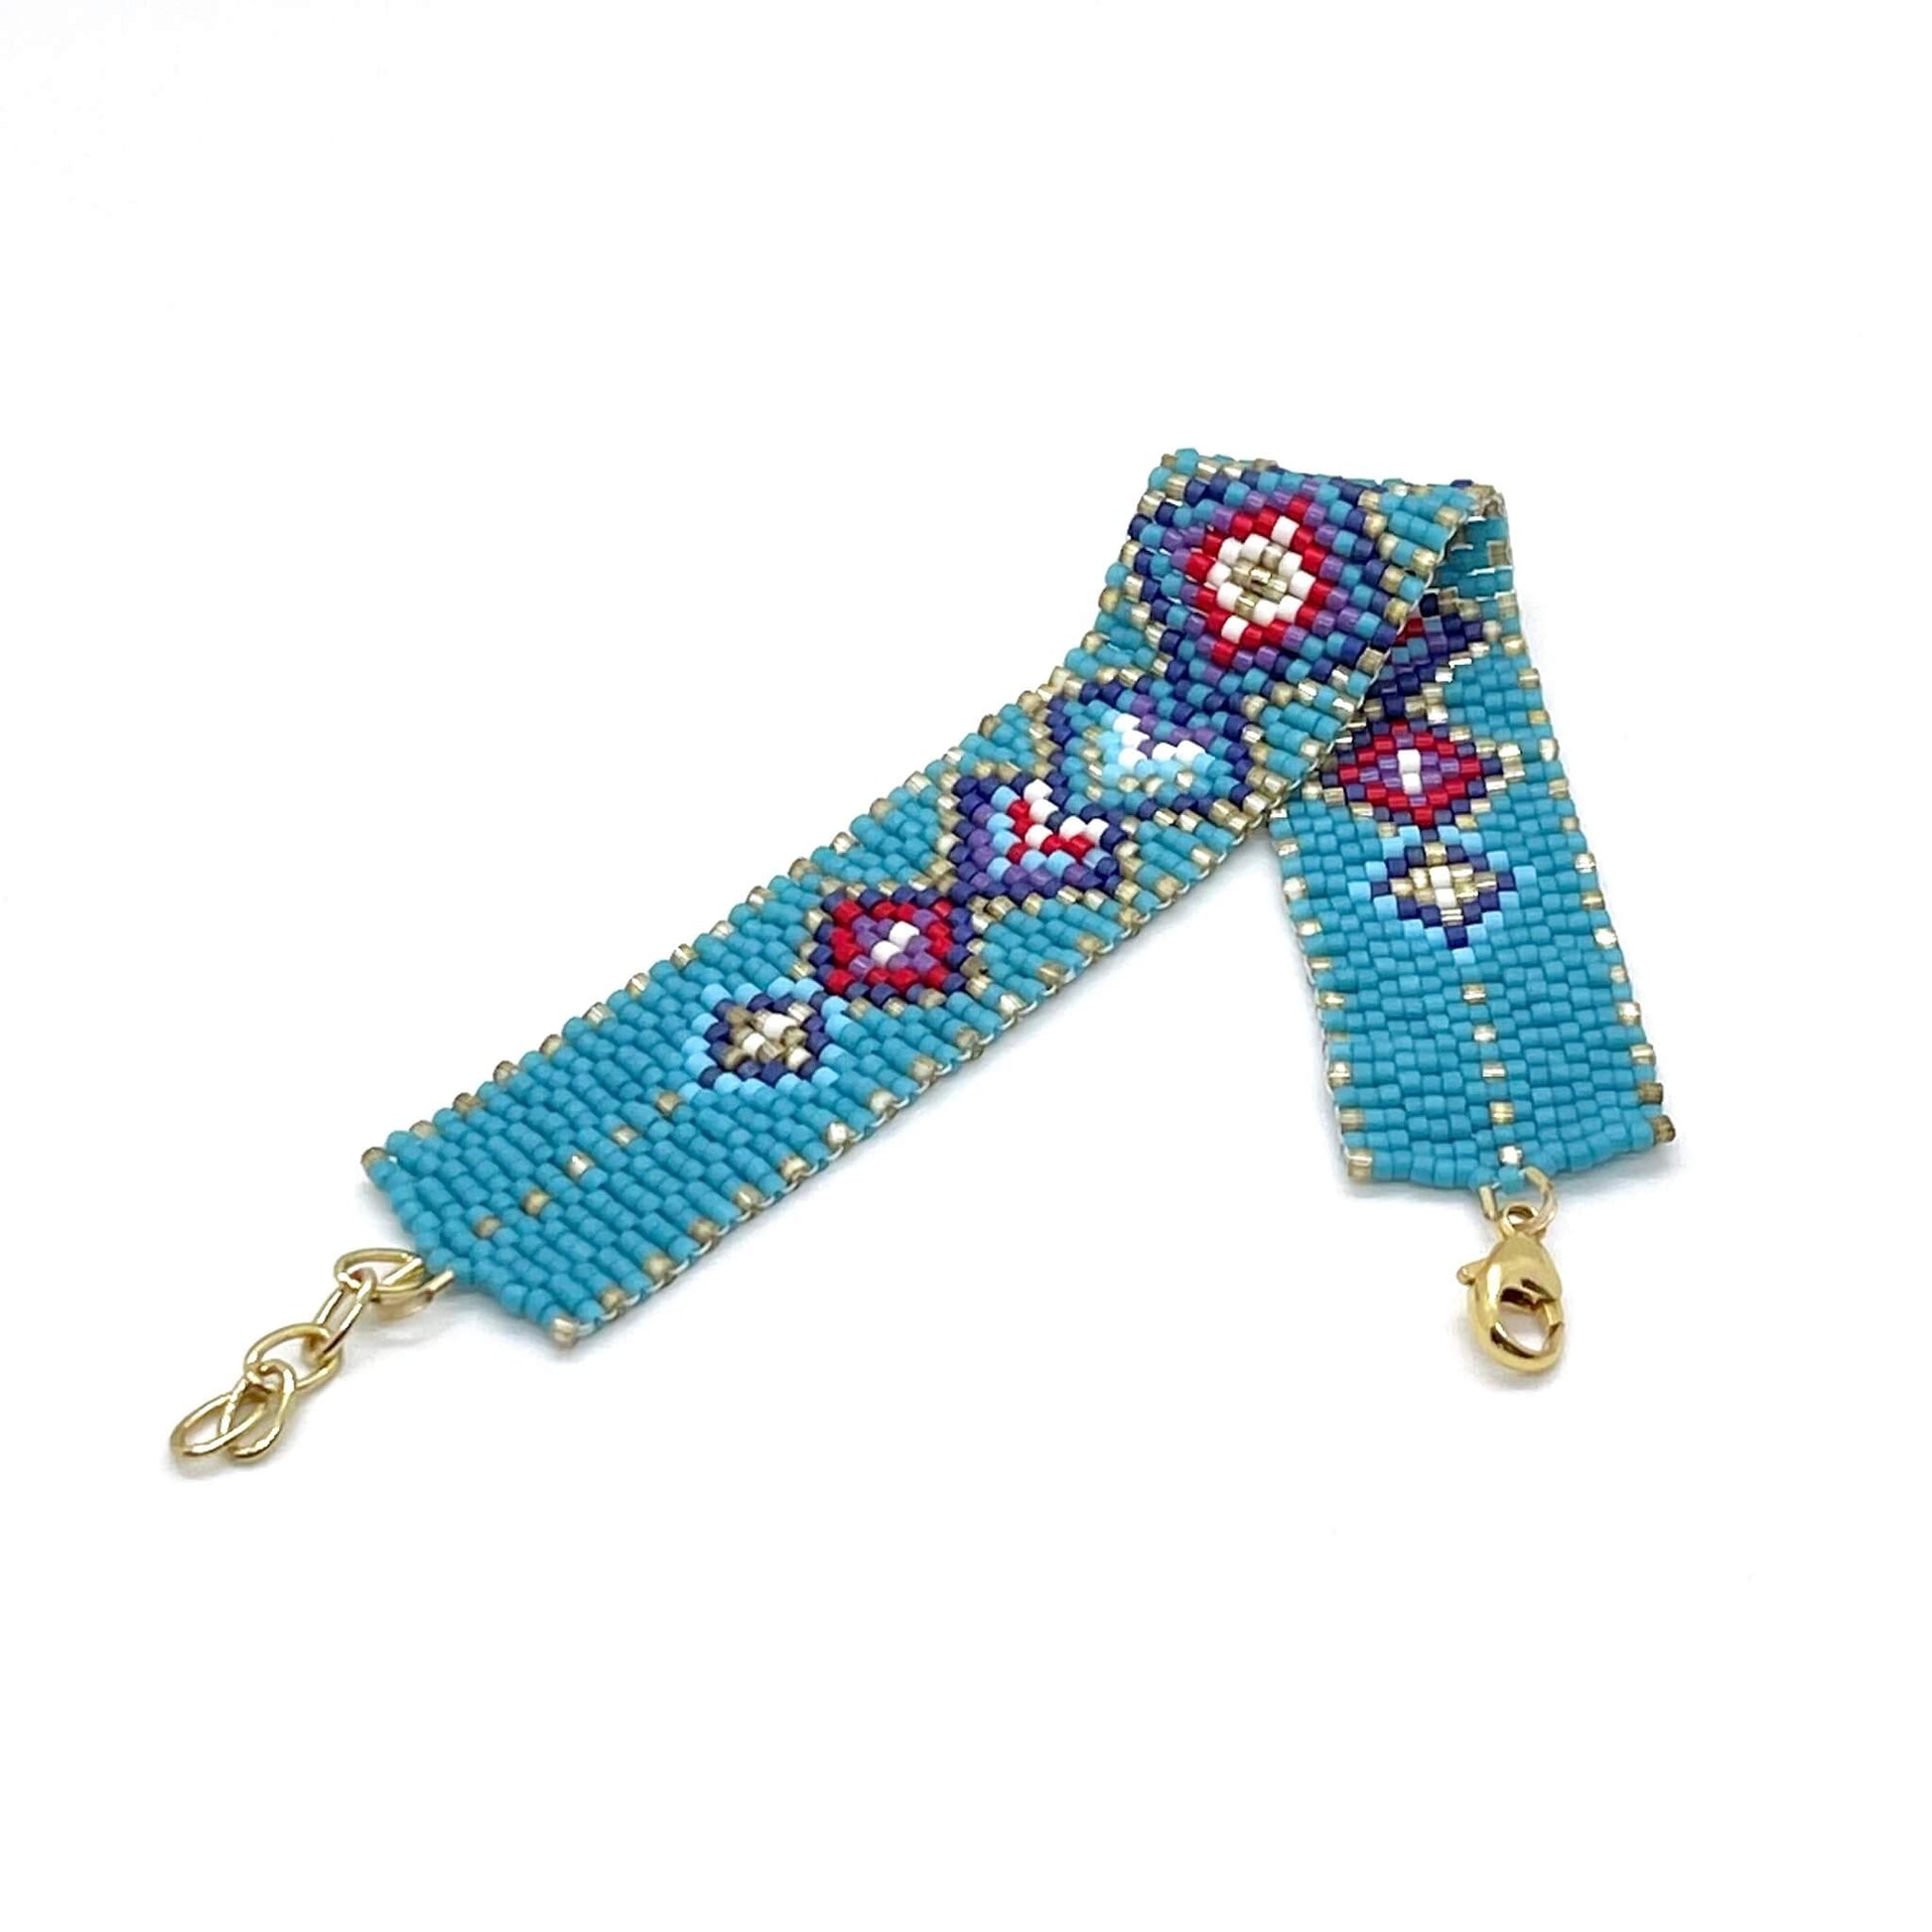 A santa-fe inspired turquoise, red, gold, and purple peyote stitch bracelet with a diamond pattern.